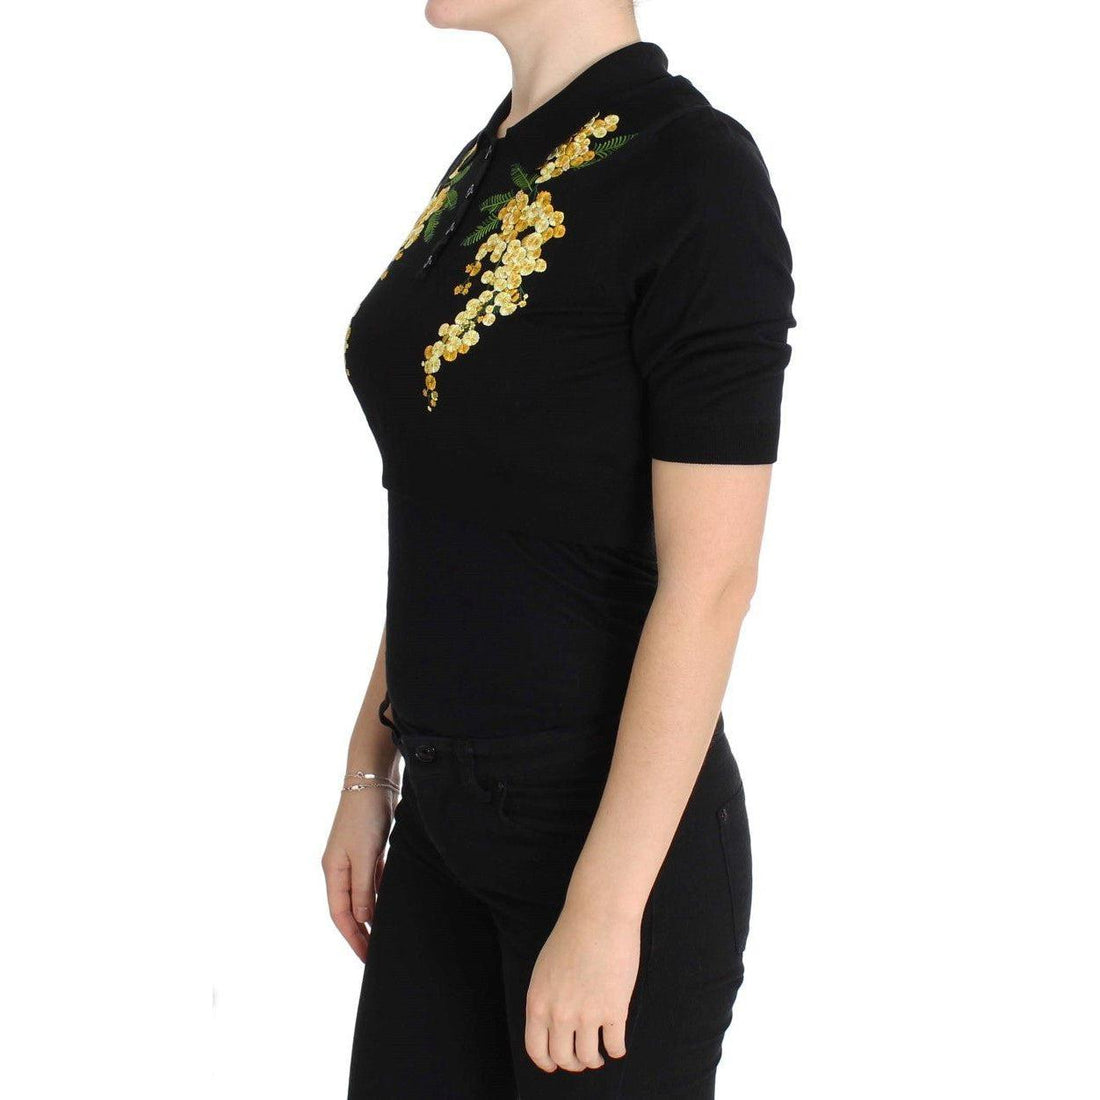 Dolce & Gabbana Black Silk Floral Embroidered Polo Top - Paris Deluxe